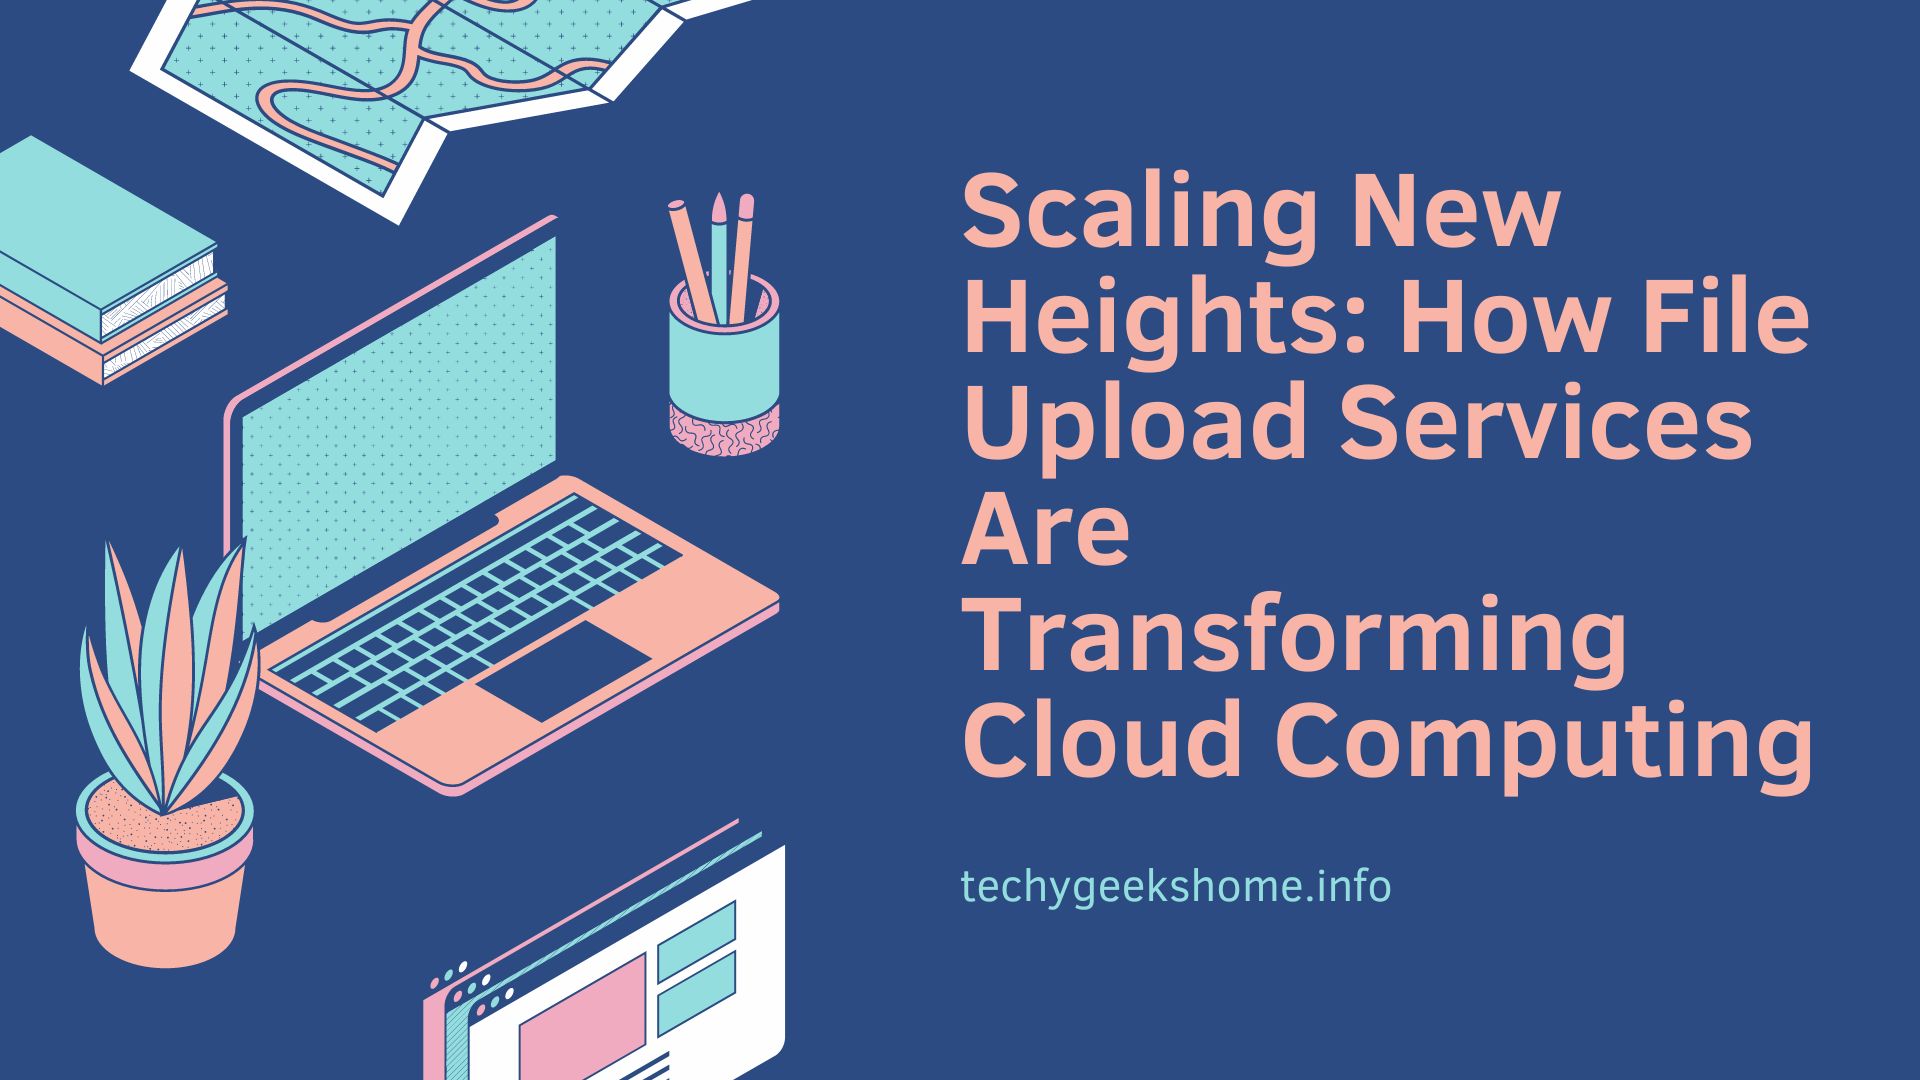 How File Upload Services Are Transforming Cloud Computing